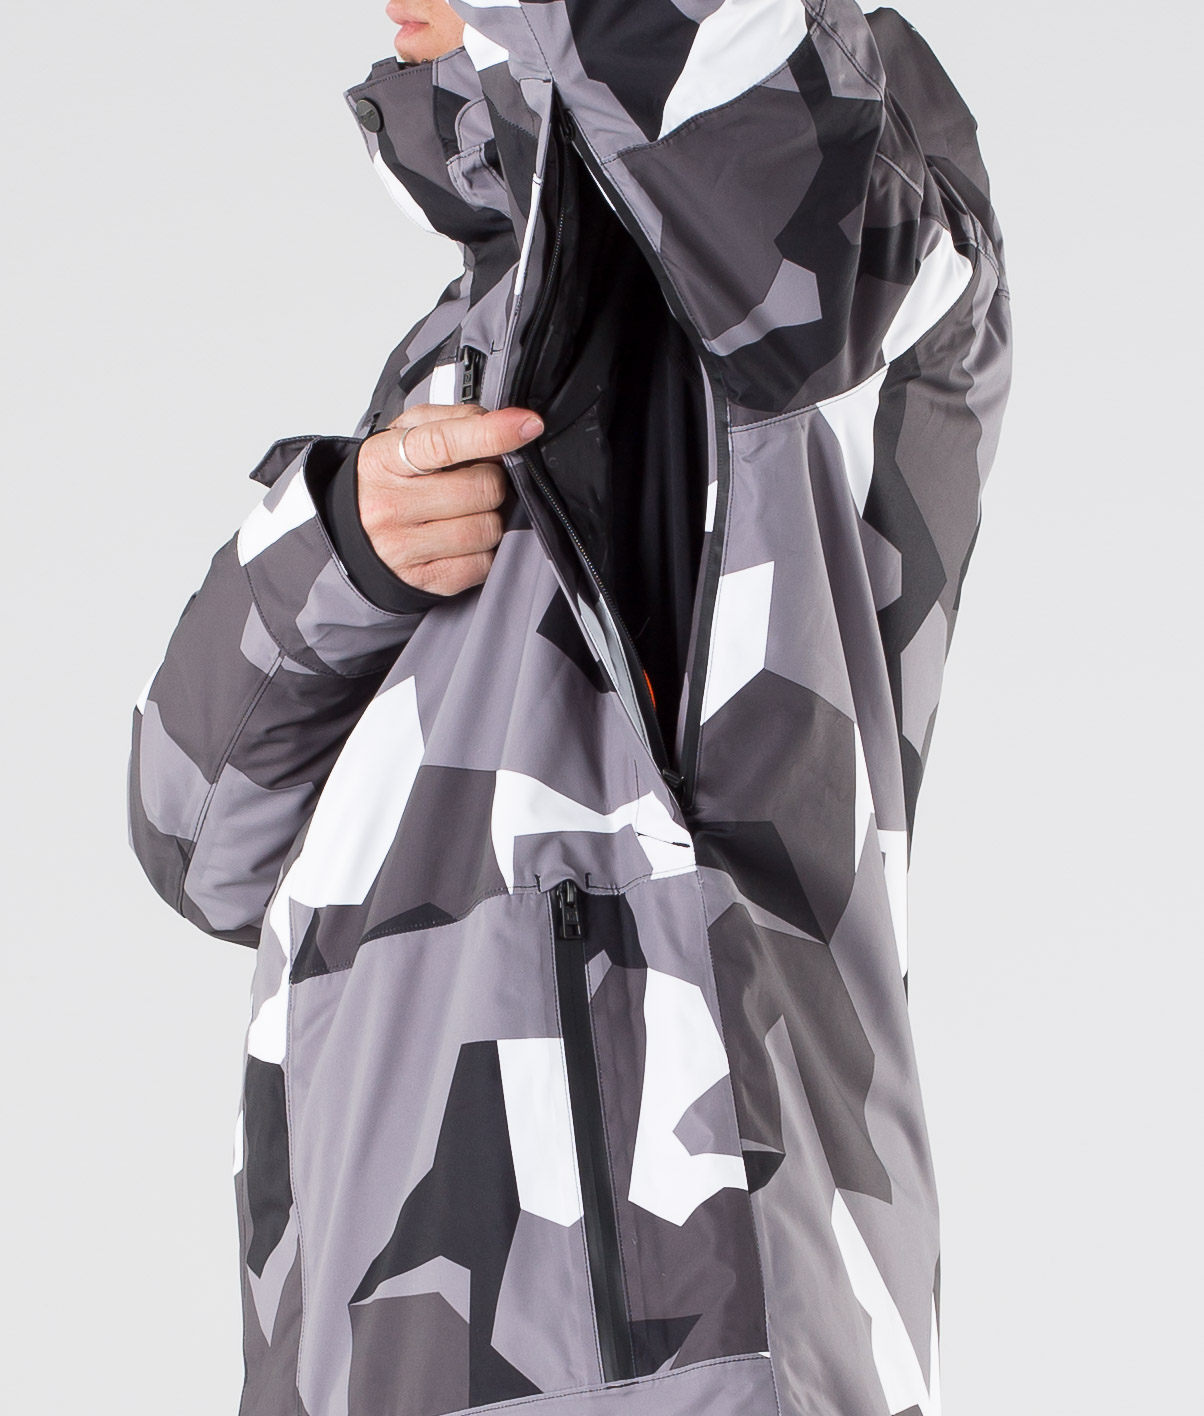 Arctic Camo Poncho cs go skin download the new for apple